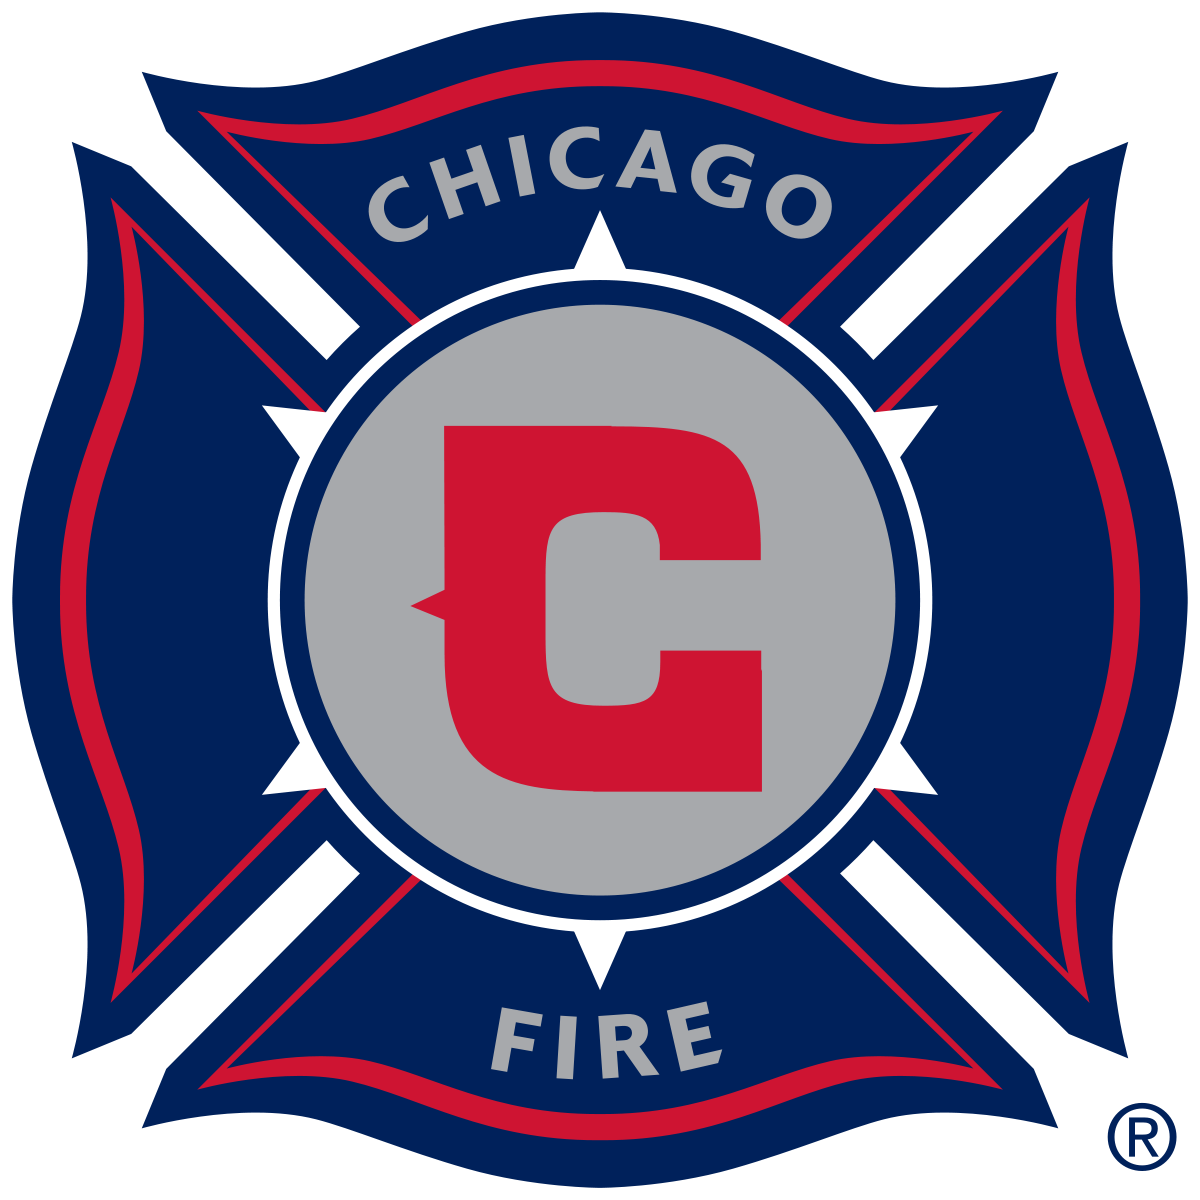 Chicago Fire Logo PNG by Alic